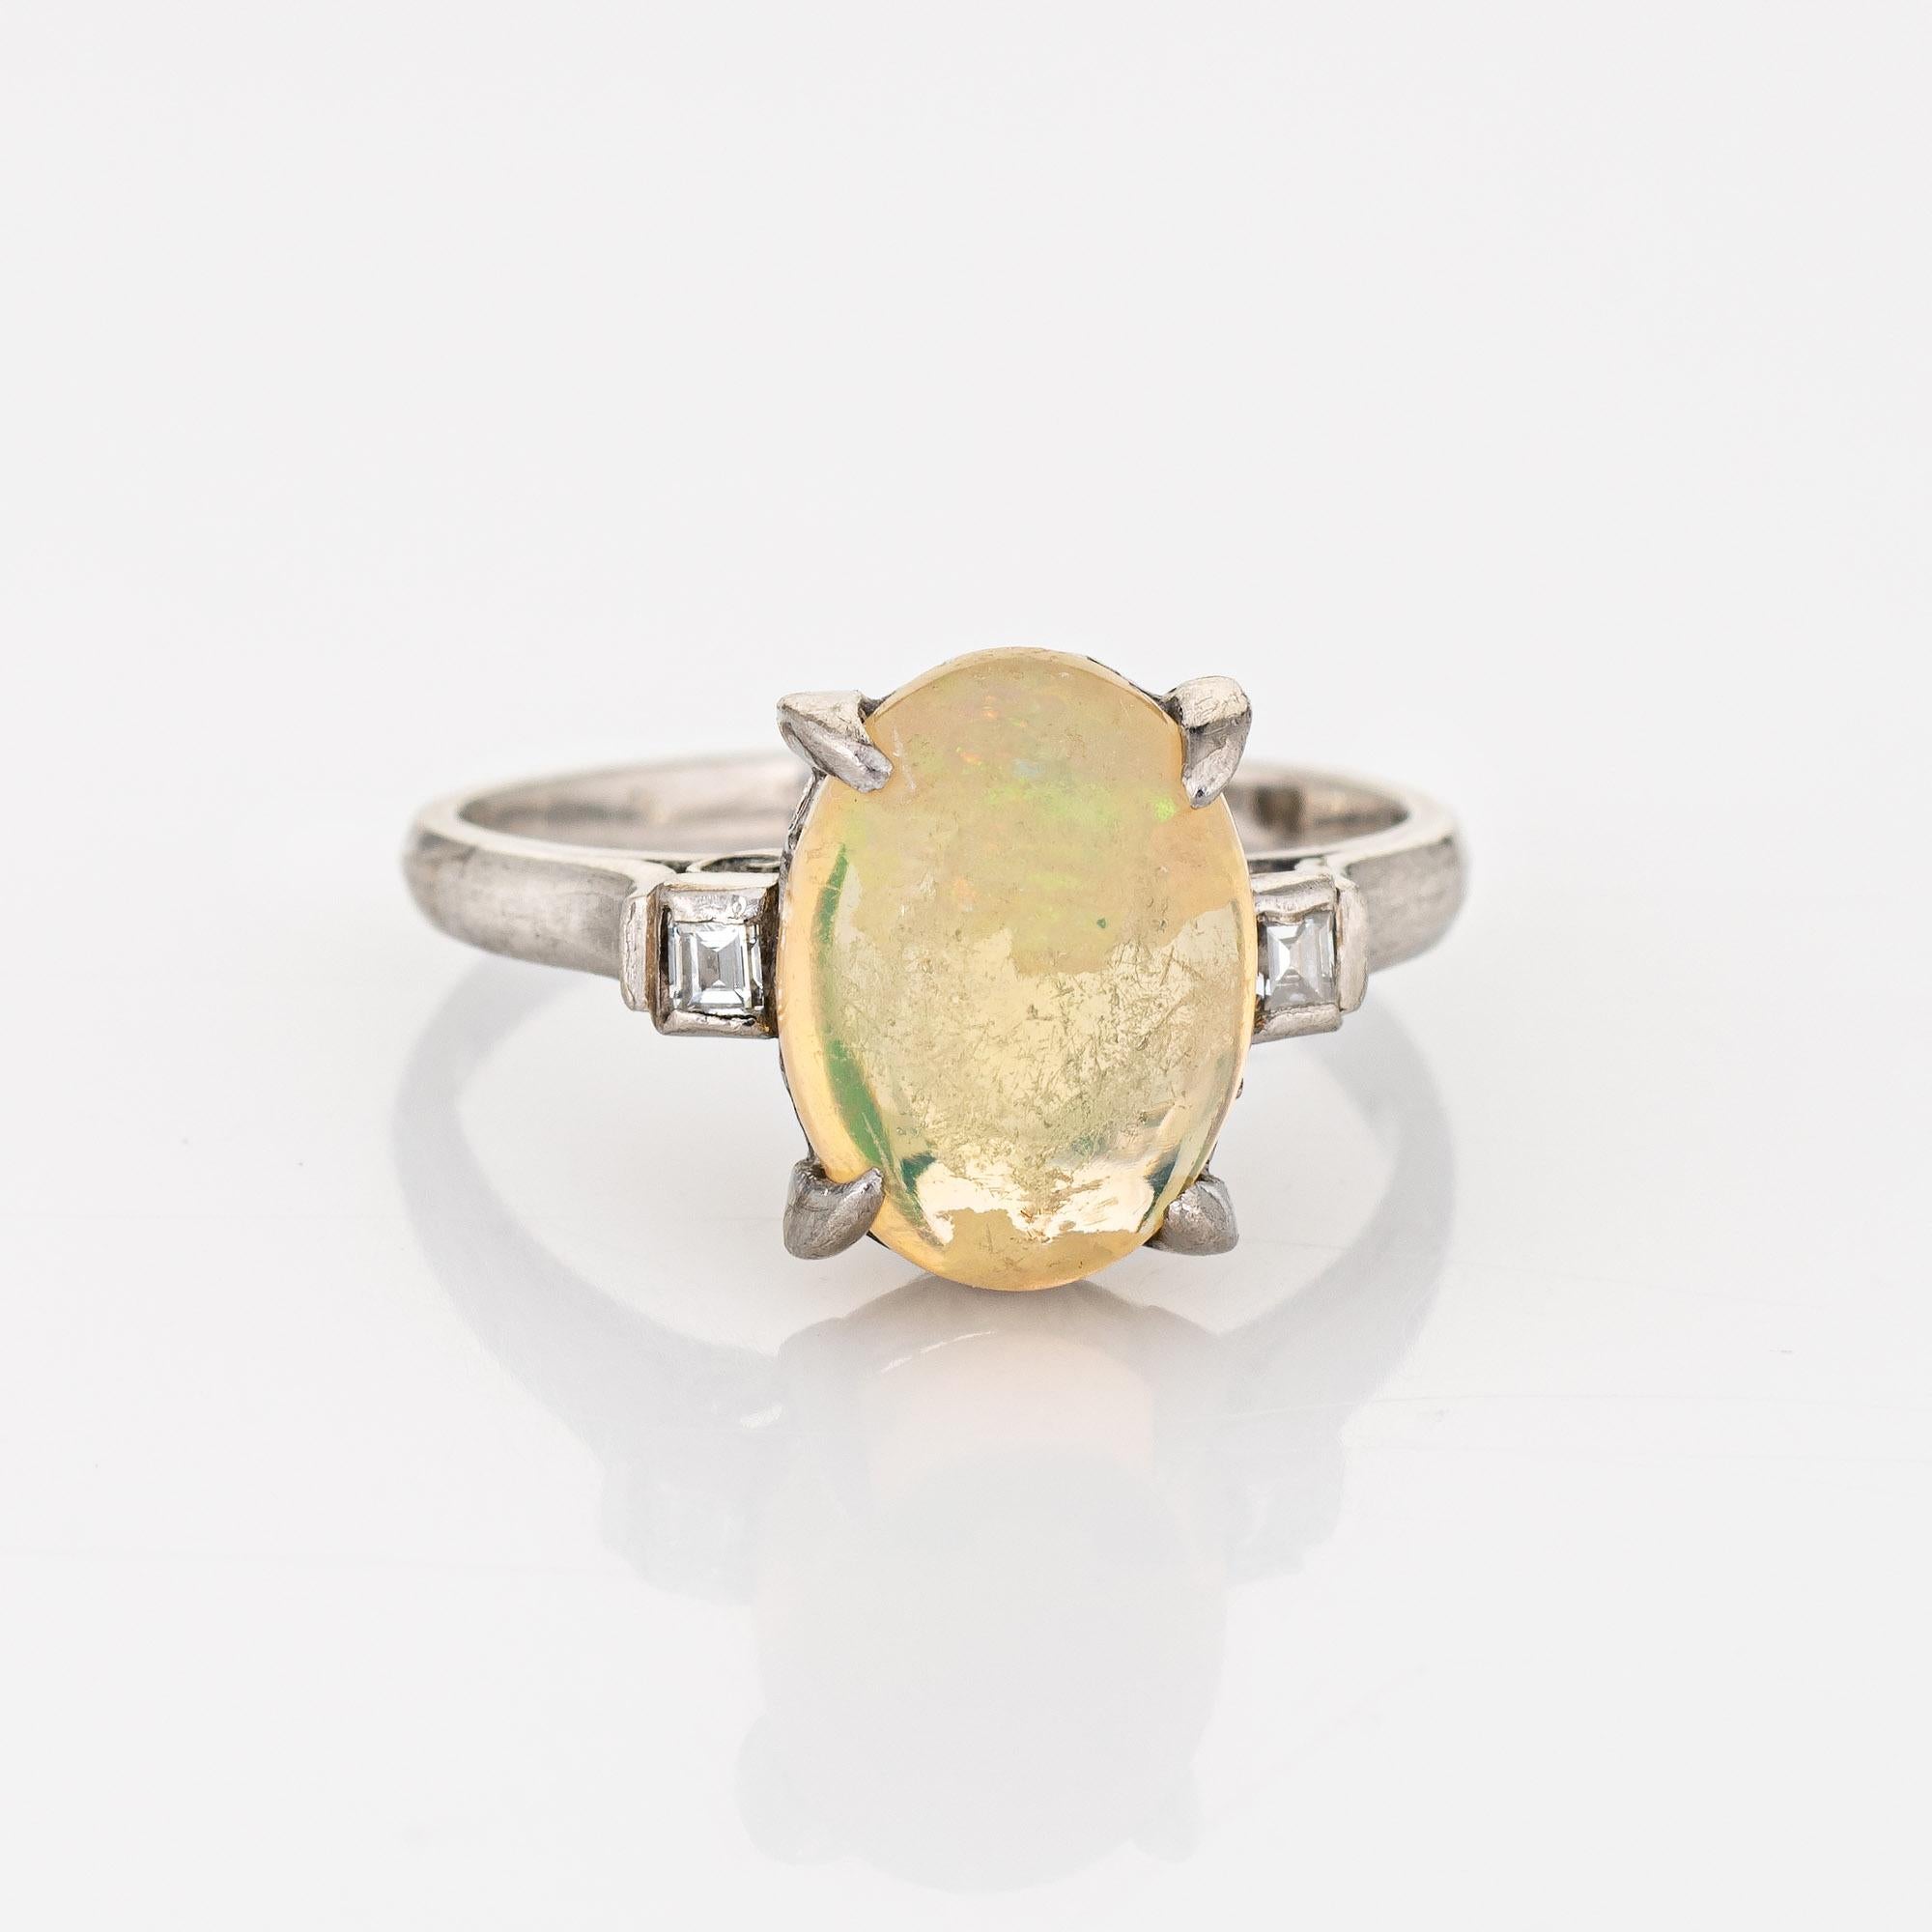 Stylish natural jelly opal & diamond cocktail ring crafted in 900 platinum. 

Cabochon cut natural jelly opal, 2.75 carats (11 x 8.5mm). The opal is in very good condition and free of cracks or chips (light surface abrasions from normal wear evident